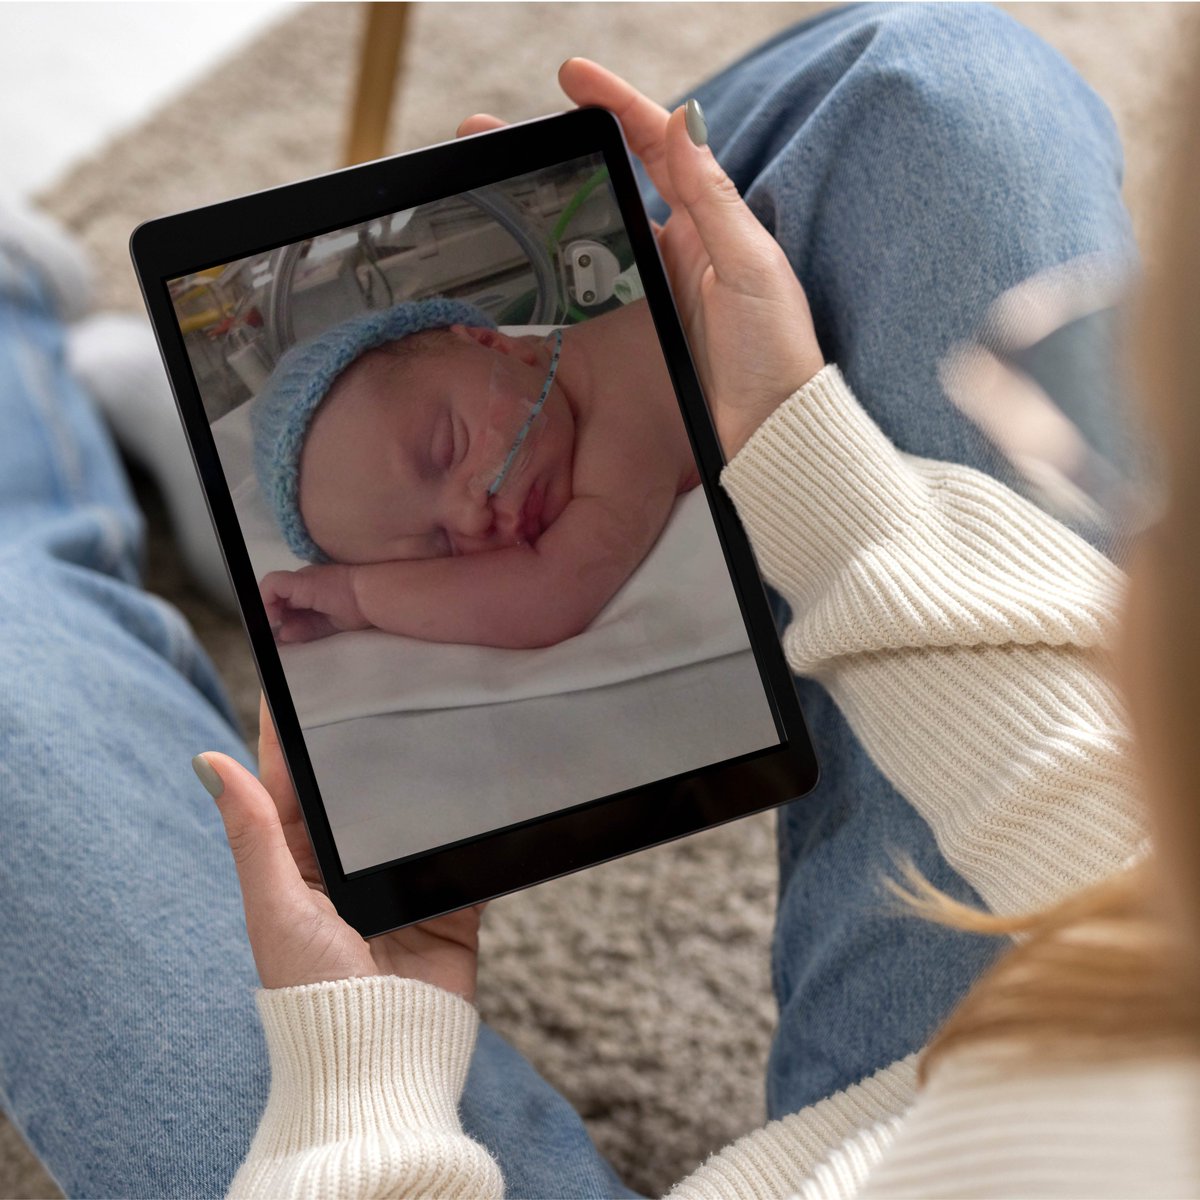 Our neonatal team need five new iPads to share photos and videos of babies in the unit with their parents at home💙 The iPads help provide a vital connection for parents who are worried about their poorly babies 💙 If you can help, please visit: enhhcharity.org.uk/neonatal💙